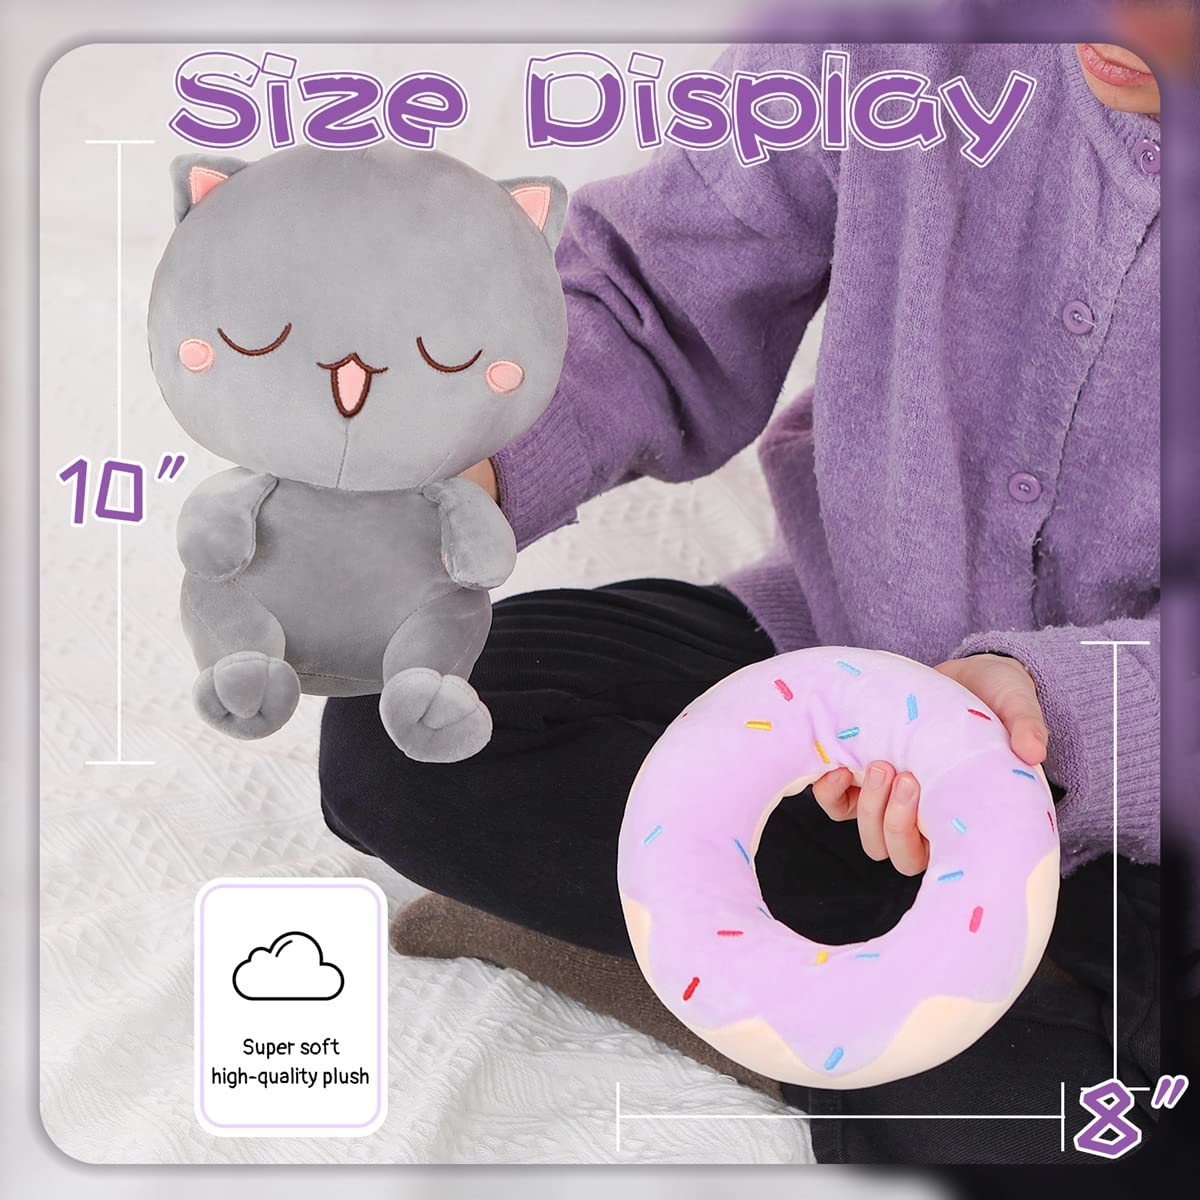 25 CM / 10 inch Cute cat plush, stuffed soft animal with donut, super soft cute gray kitten plush toy with closed eyes